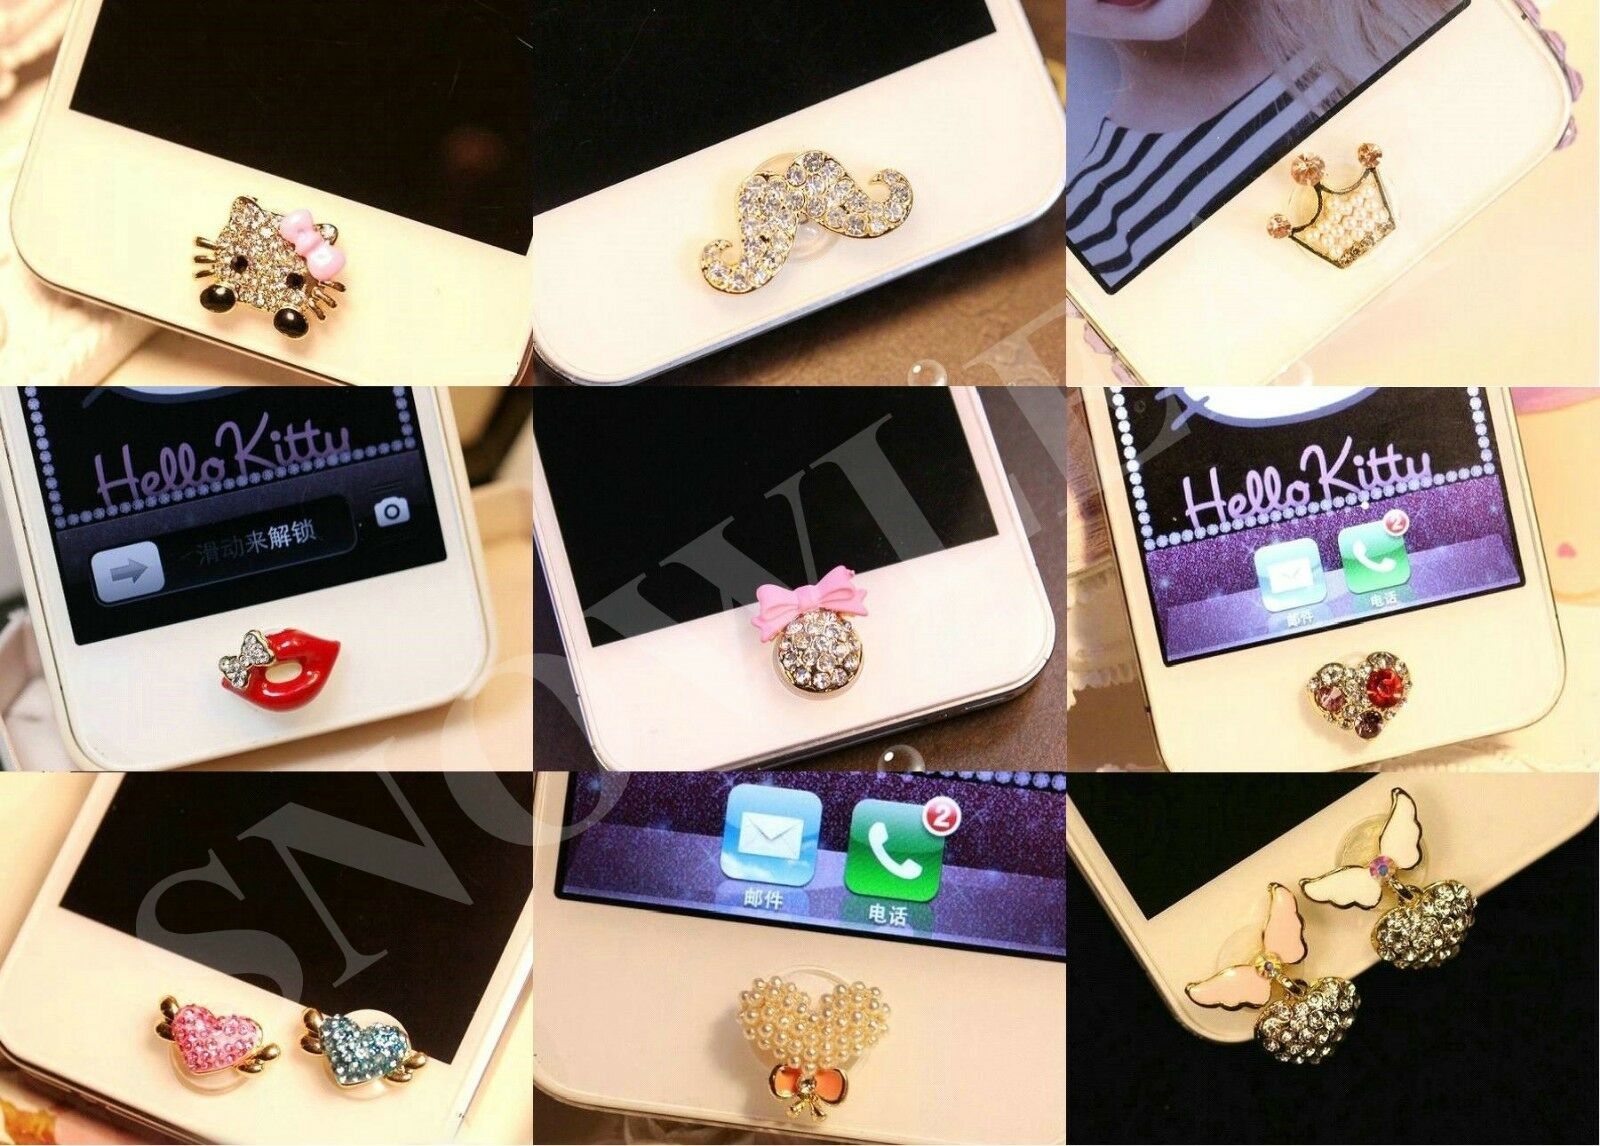 Cute Jewelry Design Home Button Sticker For Iphone4,5th,6,6 Plus,ipad,6s,6s Plus